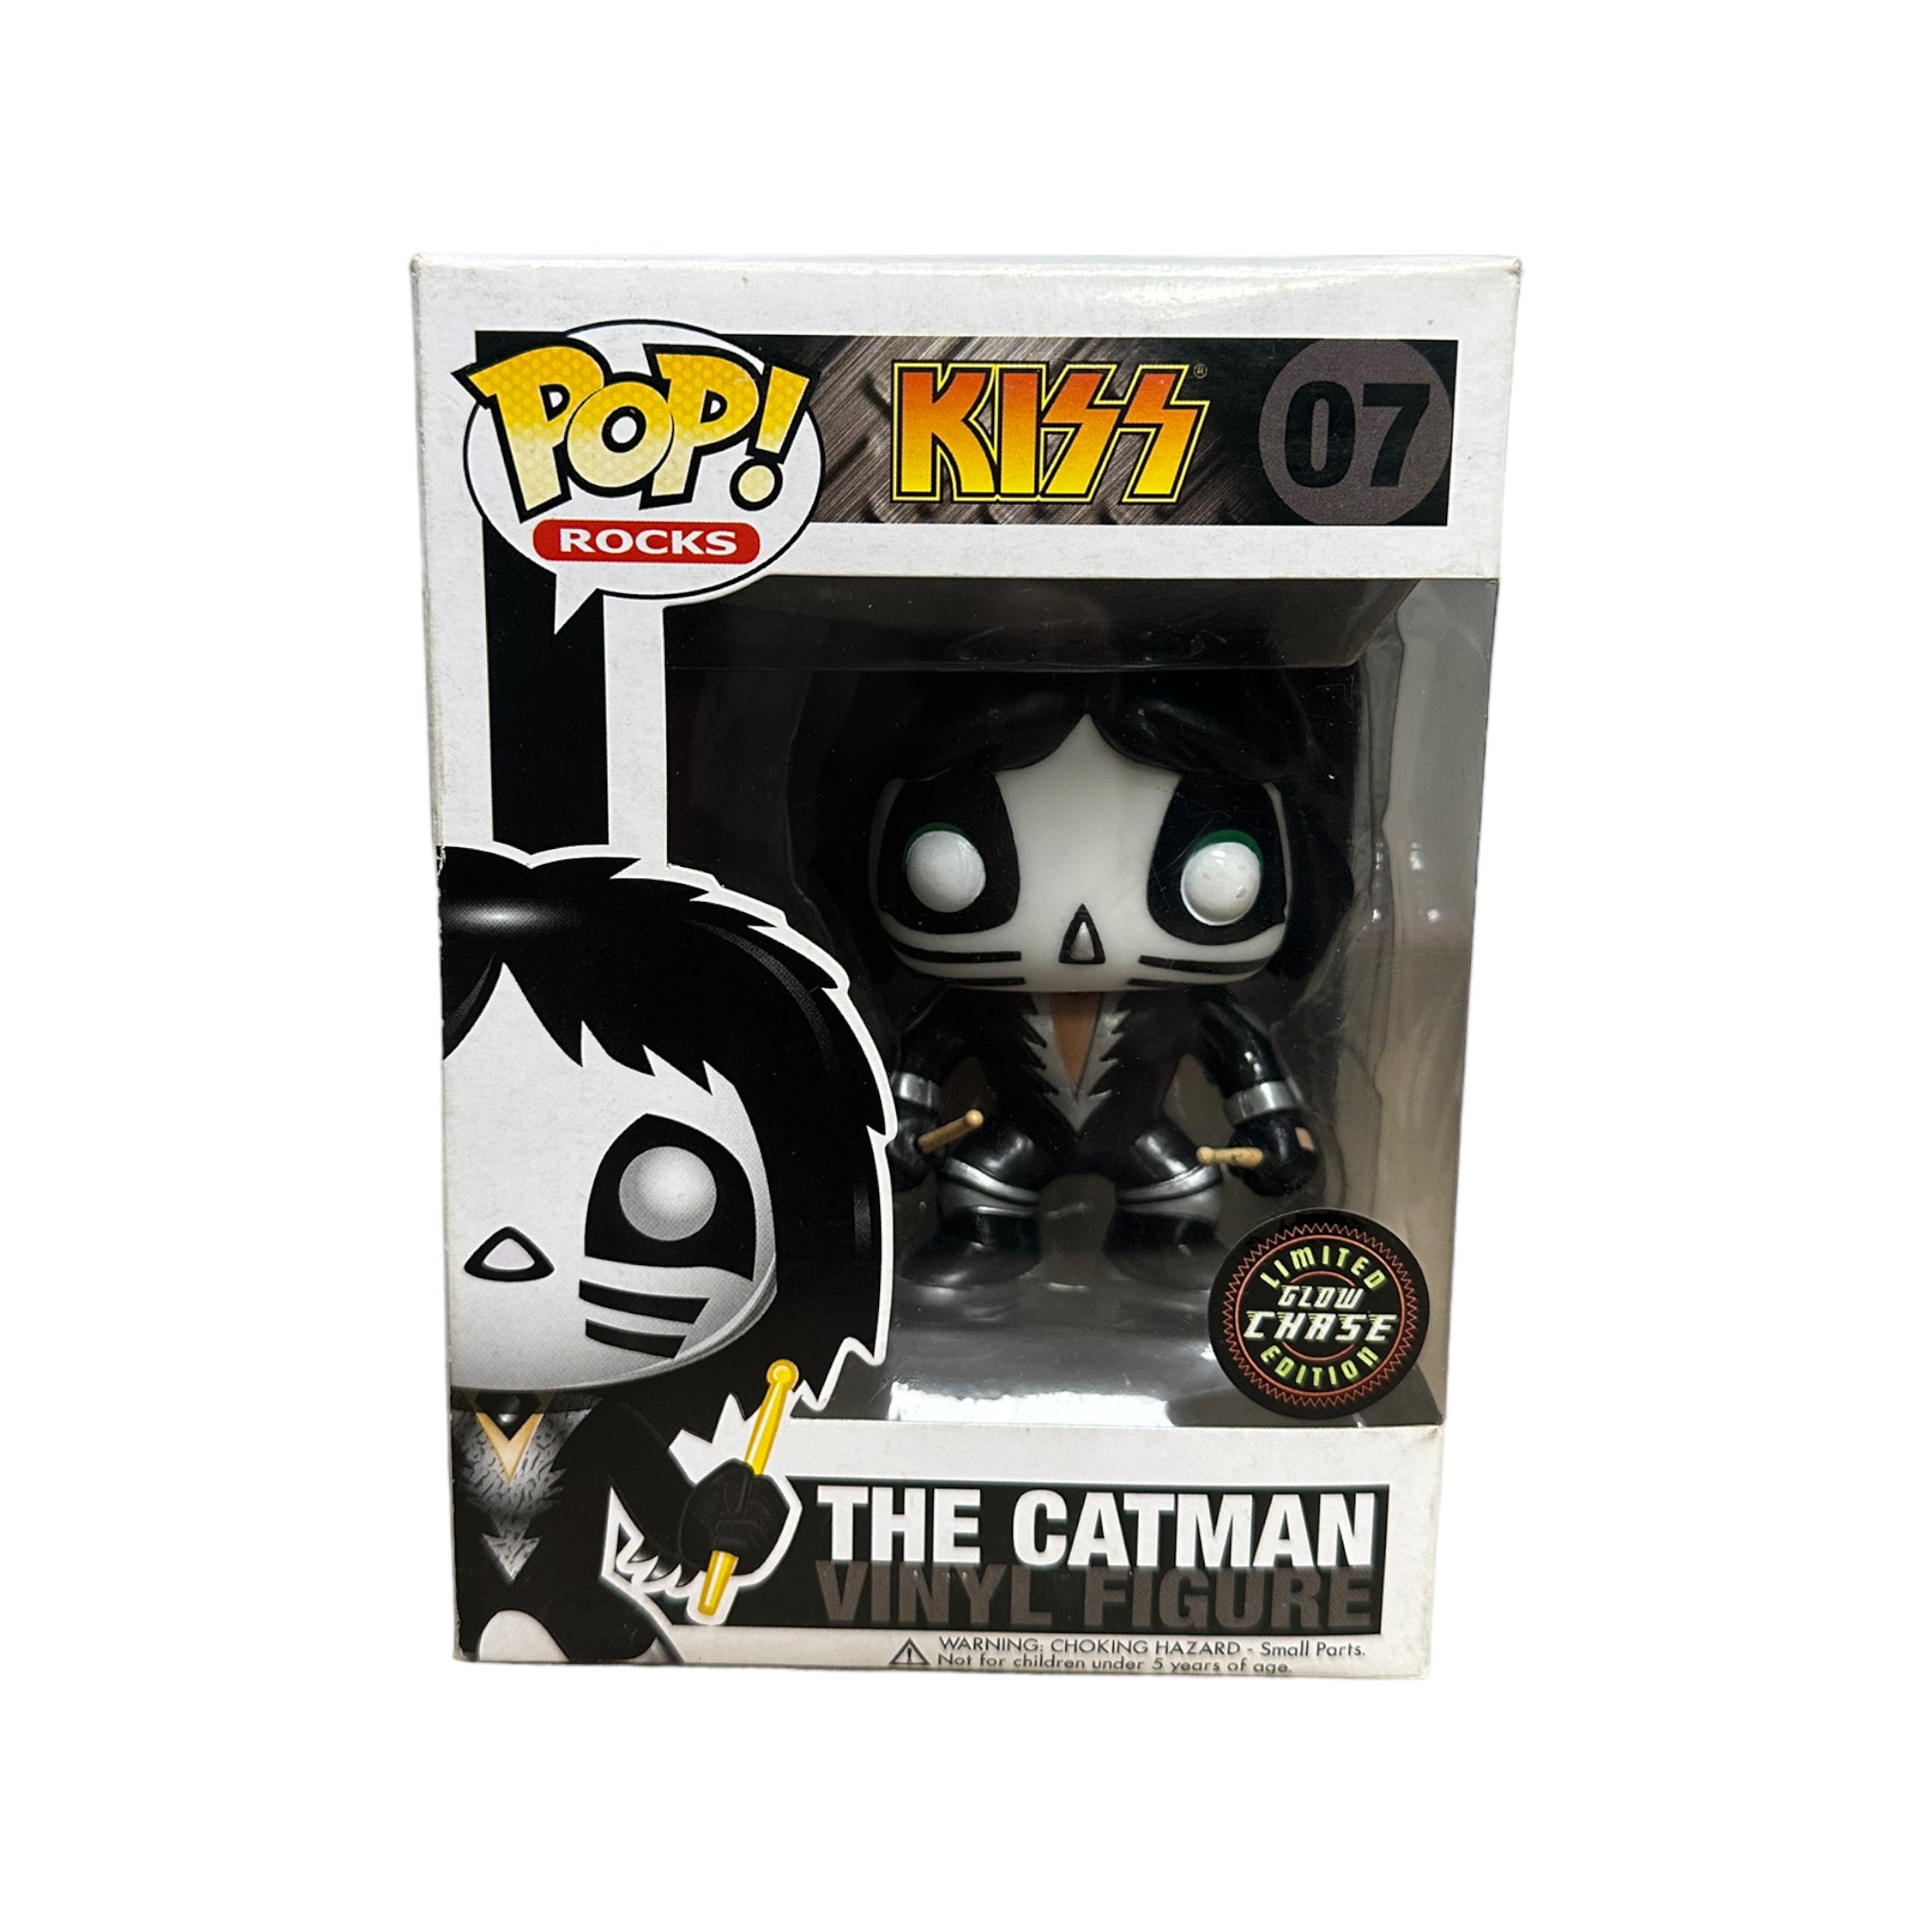 The Catman #07 (Glow Chase) Funko Pop! - Kiss - 2011 Pop! - Condition 7.5/10